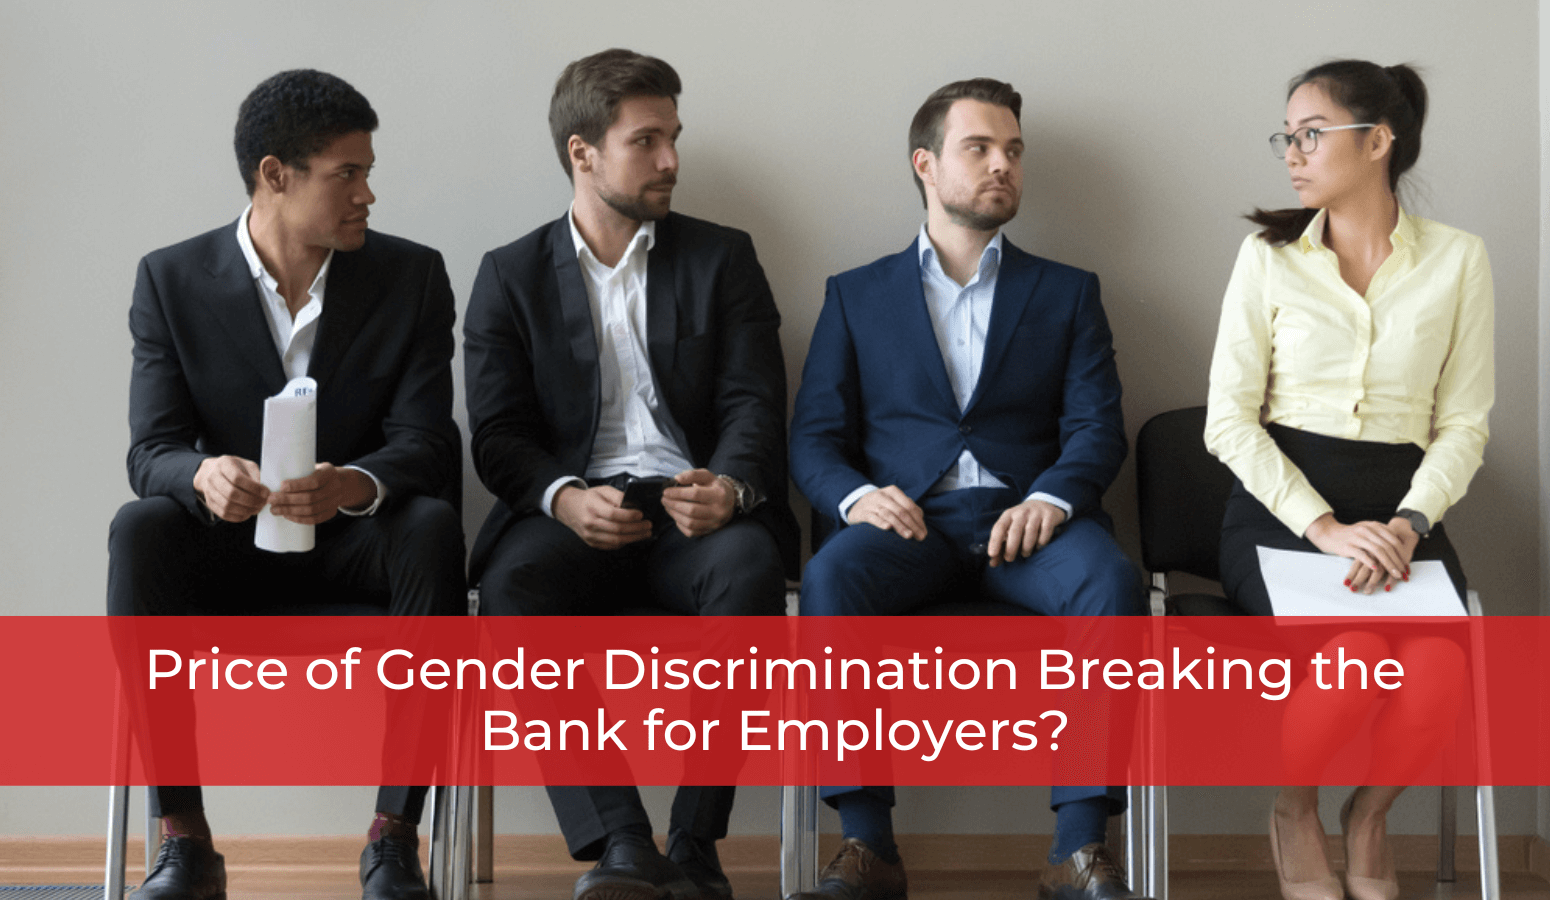 Featured image for “Price of Gender Discrimination Breaking the Bank for Employers?”